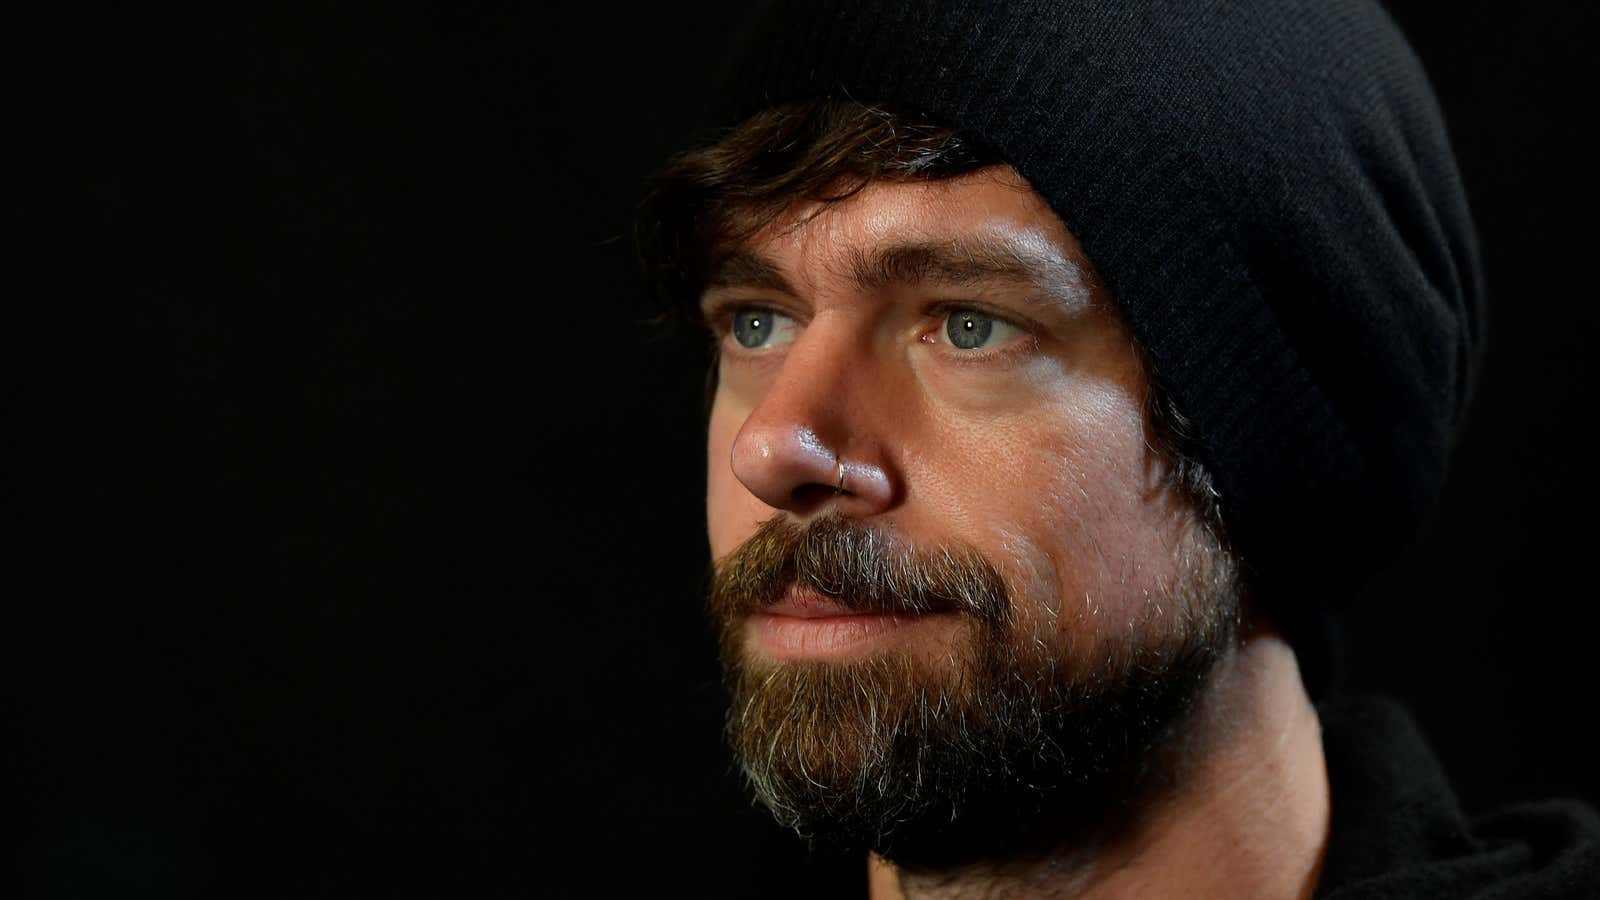 Are Jack Dorsey’s days as Twitter CEO numbered?